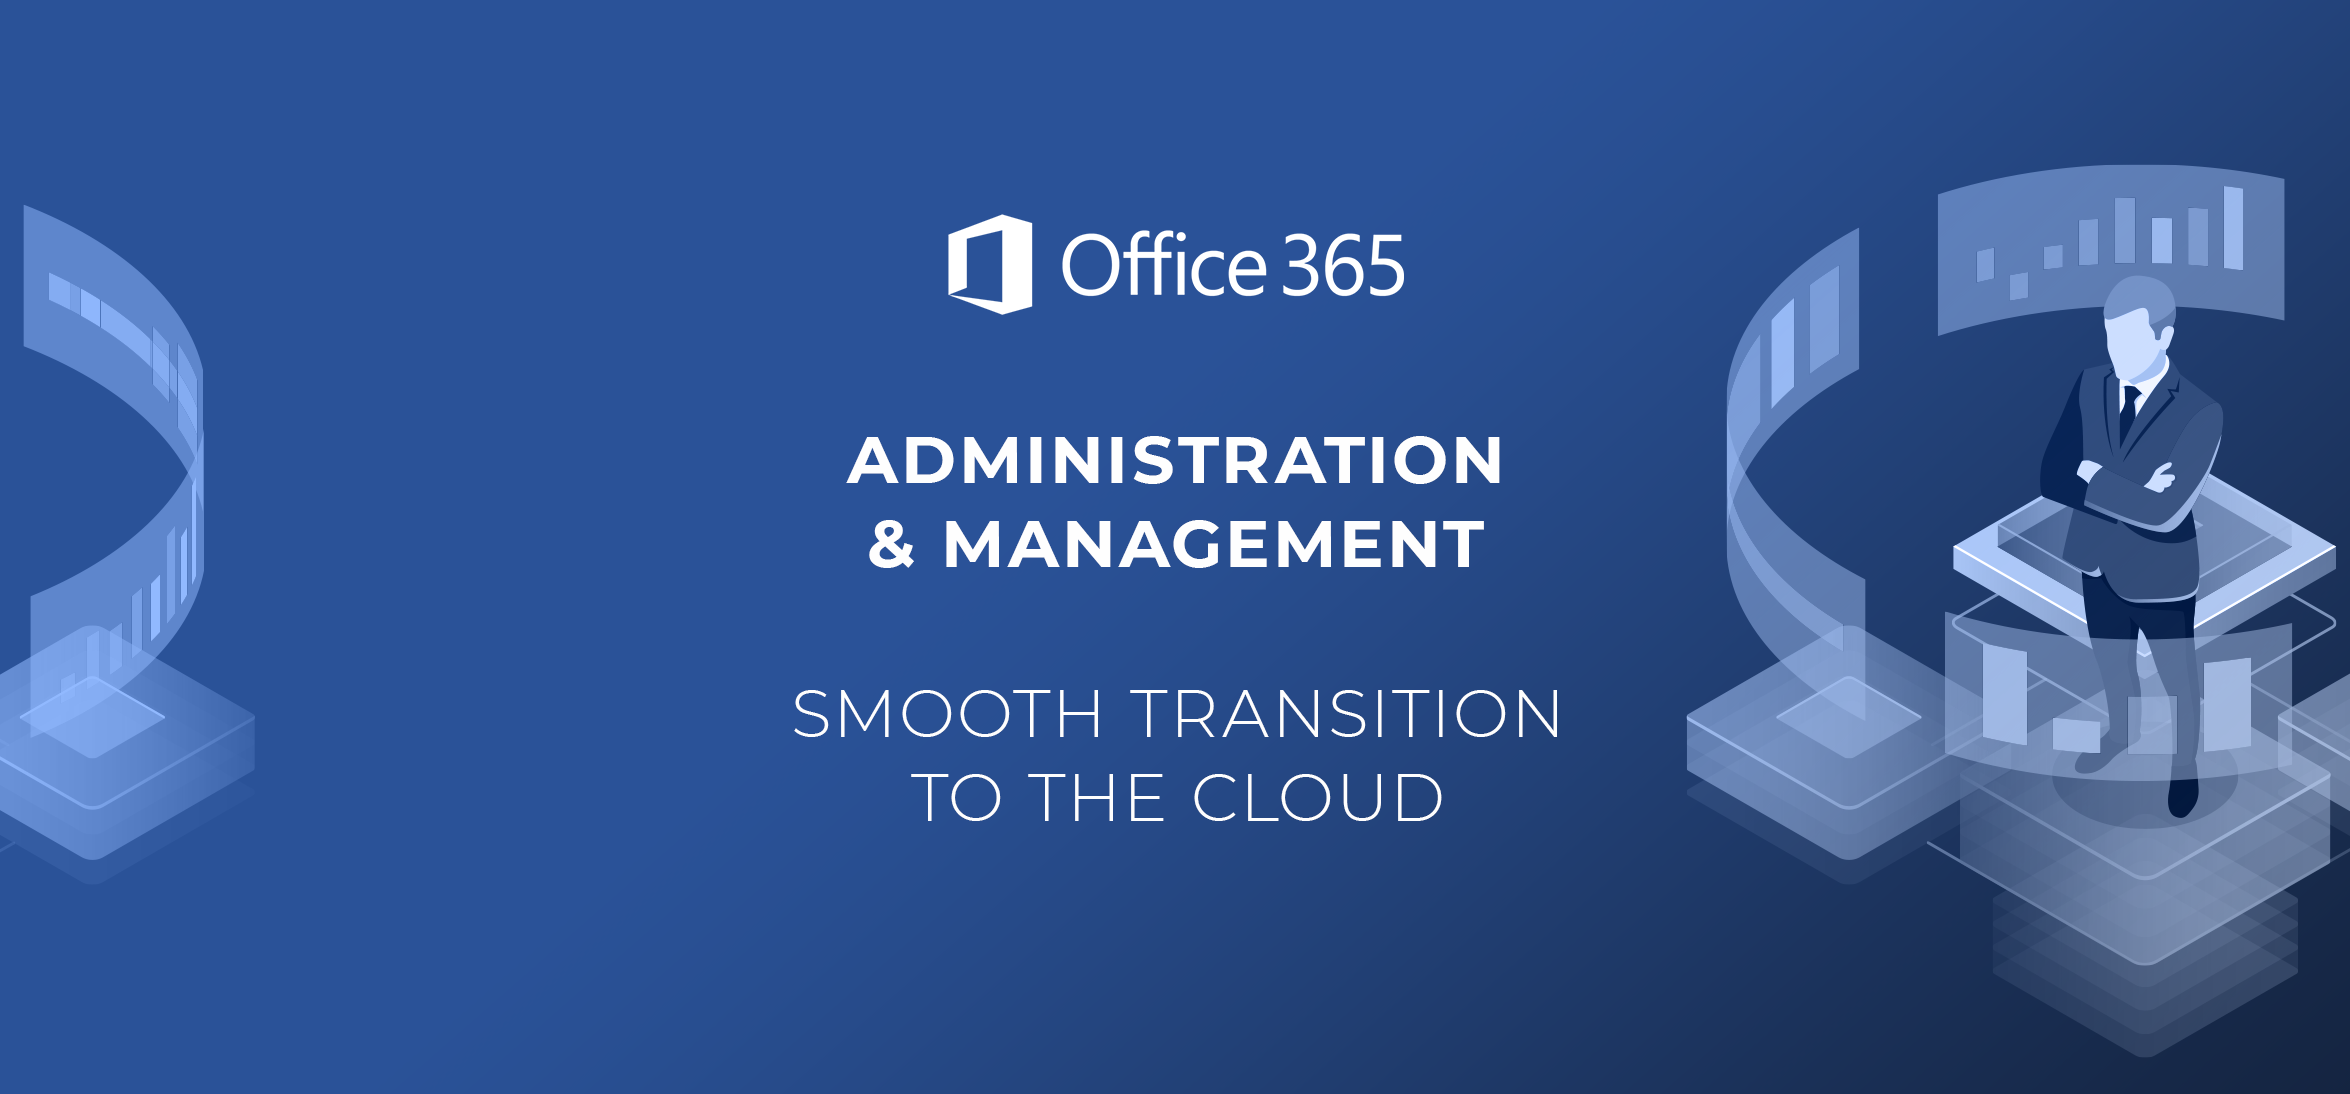 Microsoft Office 365 Administration Services in Fallbrook CA, 92088